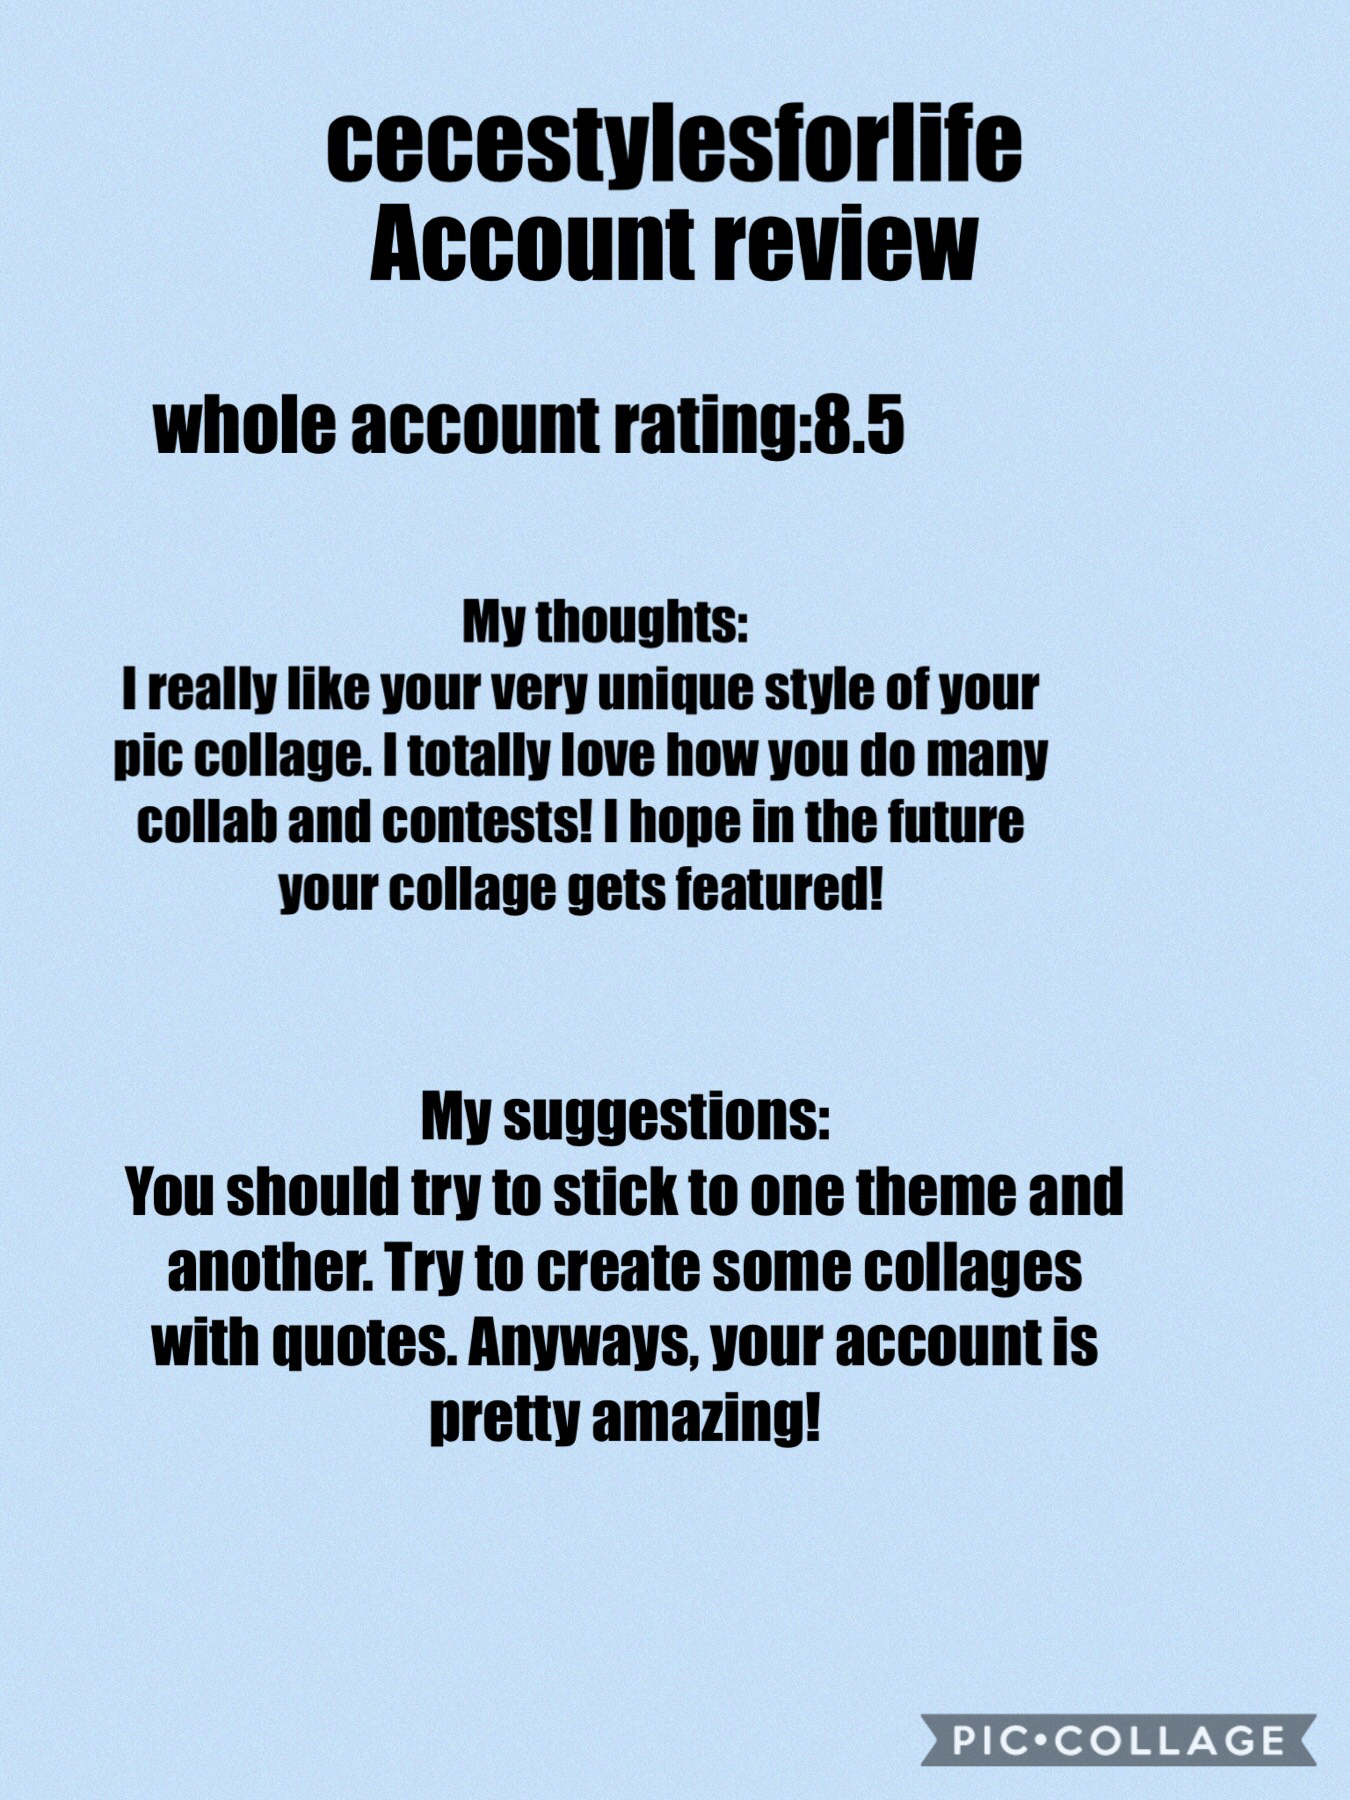 Tap

Eyy guys I have been soooo busy so yep. And here’s another review @cecestylesforlife!
You’re welcome and thank you for entering my account review!!